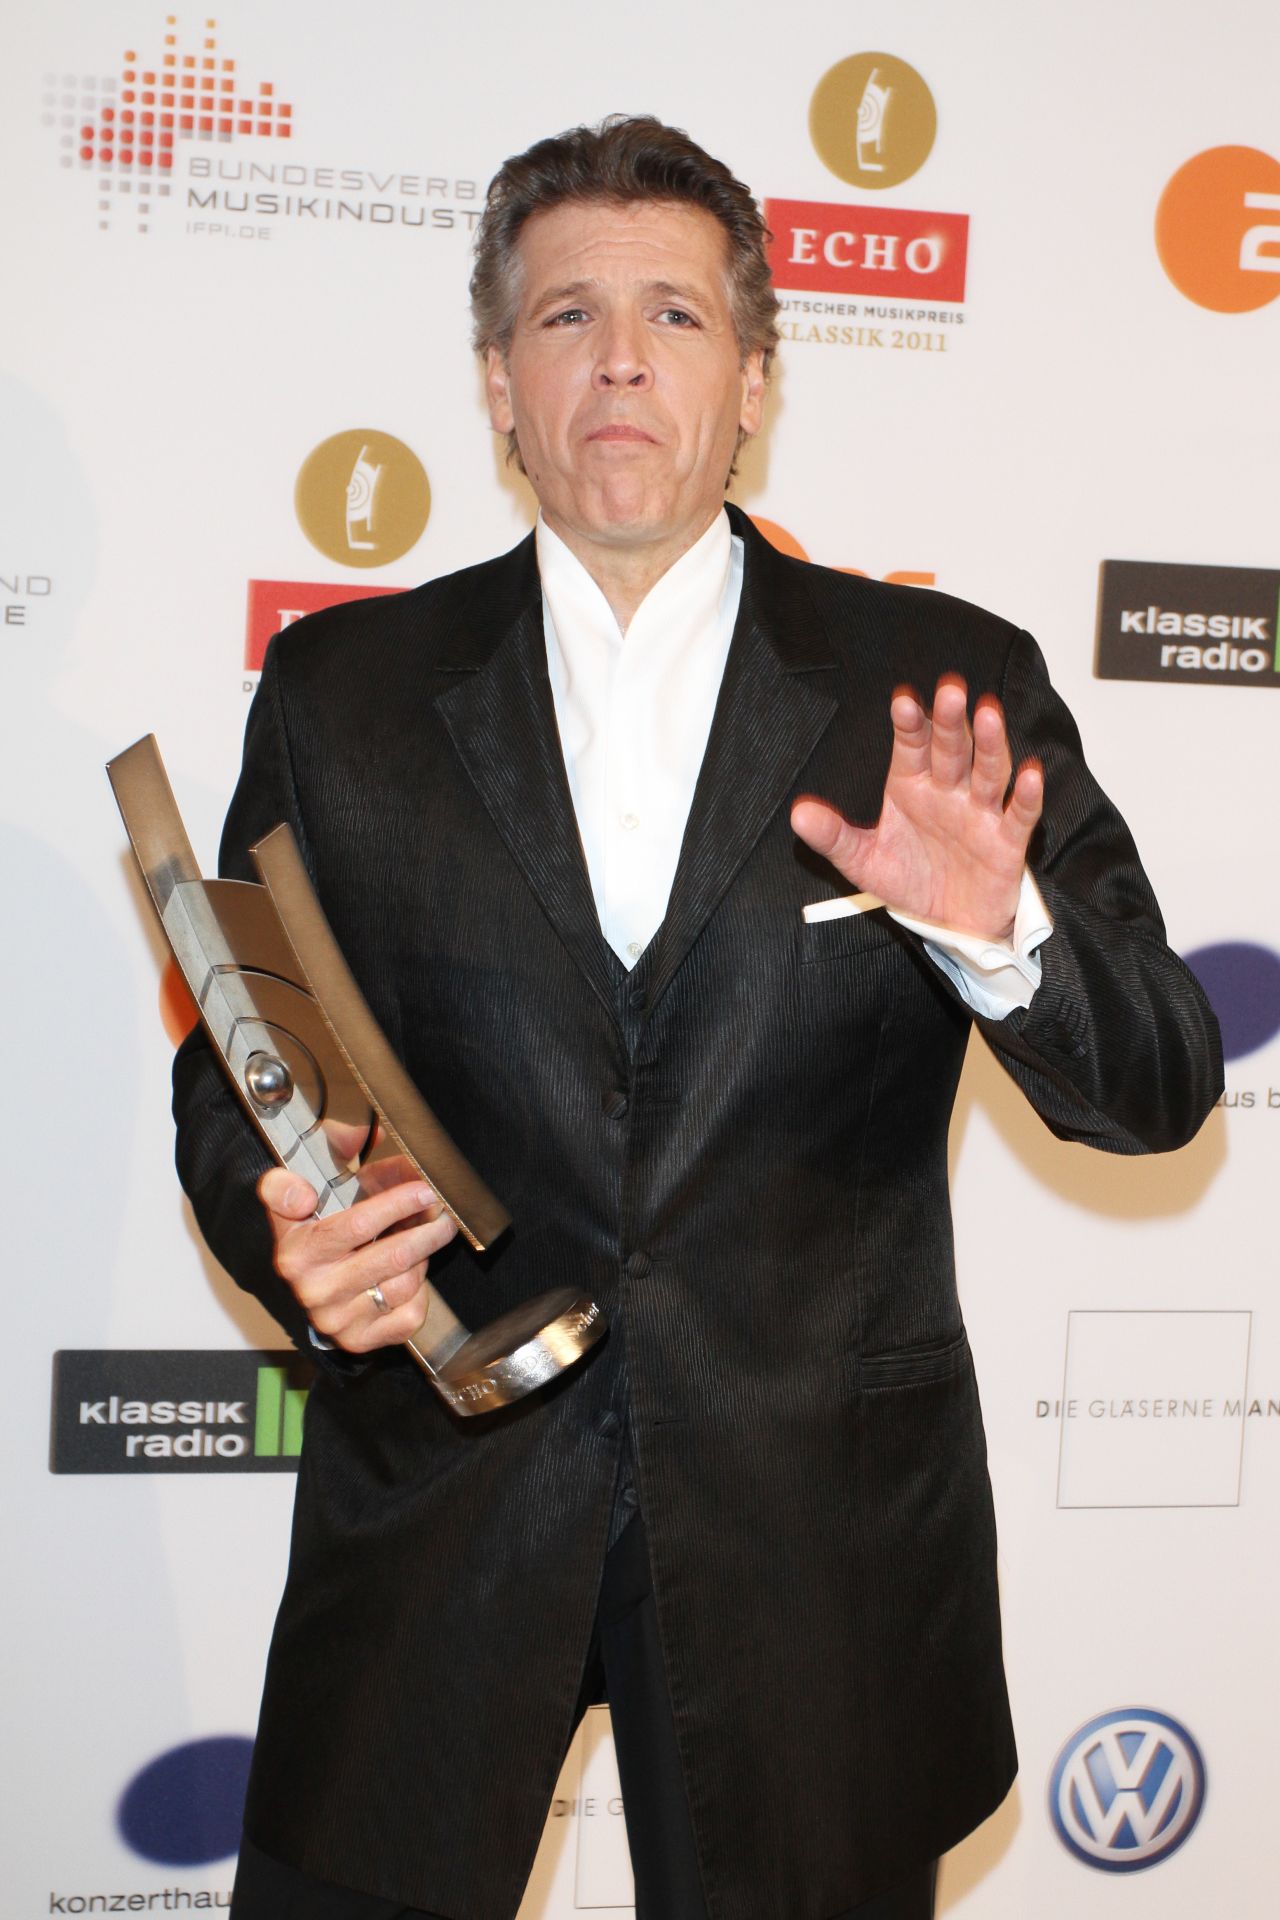 Hampson has won a litany of awards, including multiple Grammys, two Edison Prizes and the coveted Grand Prix de Disque -- the highest award for musical recordings in France. Here he is pictured clasping the award for "singer of the year" at the 2011 ECHO Klassik awards in Berlin. 